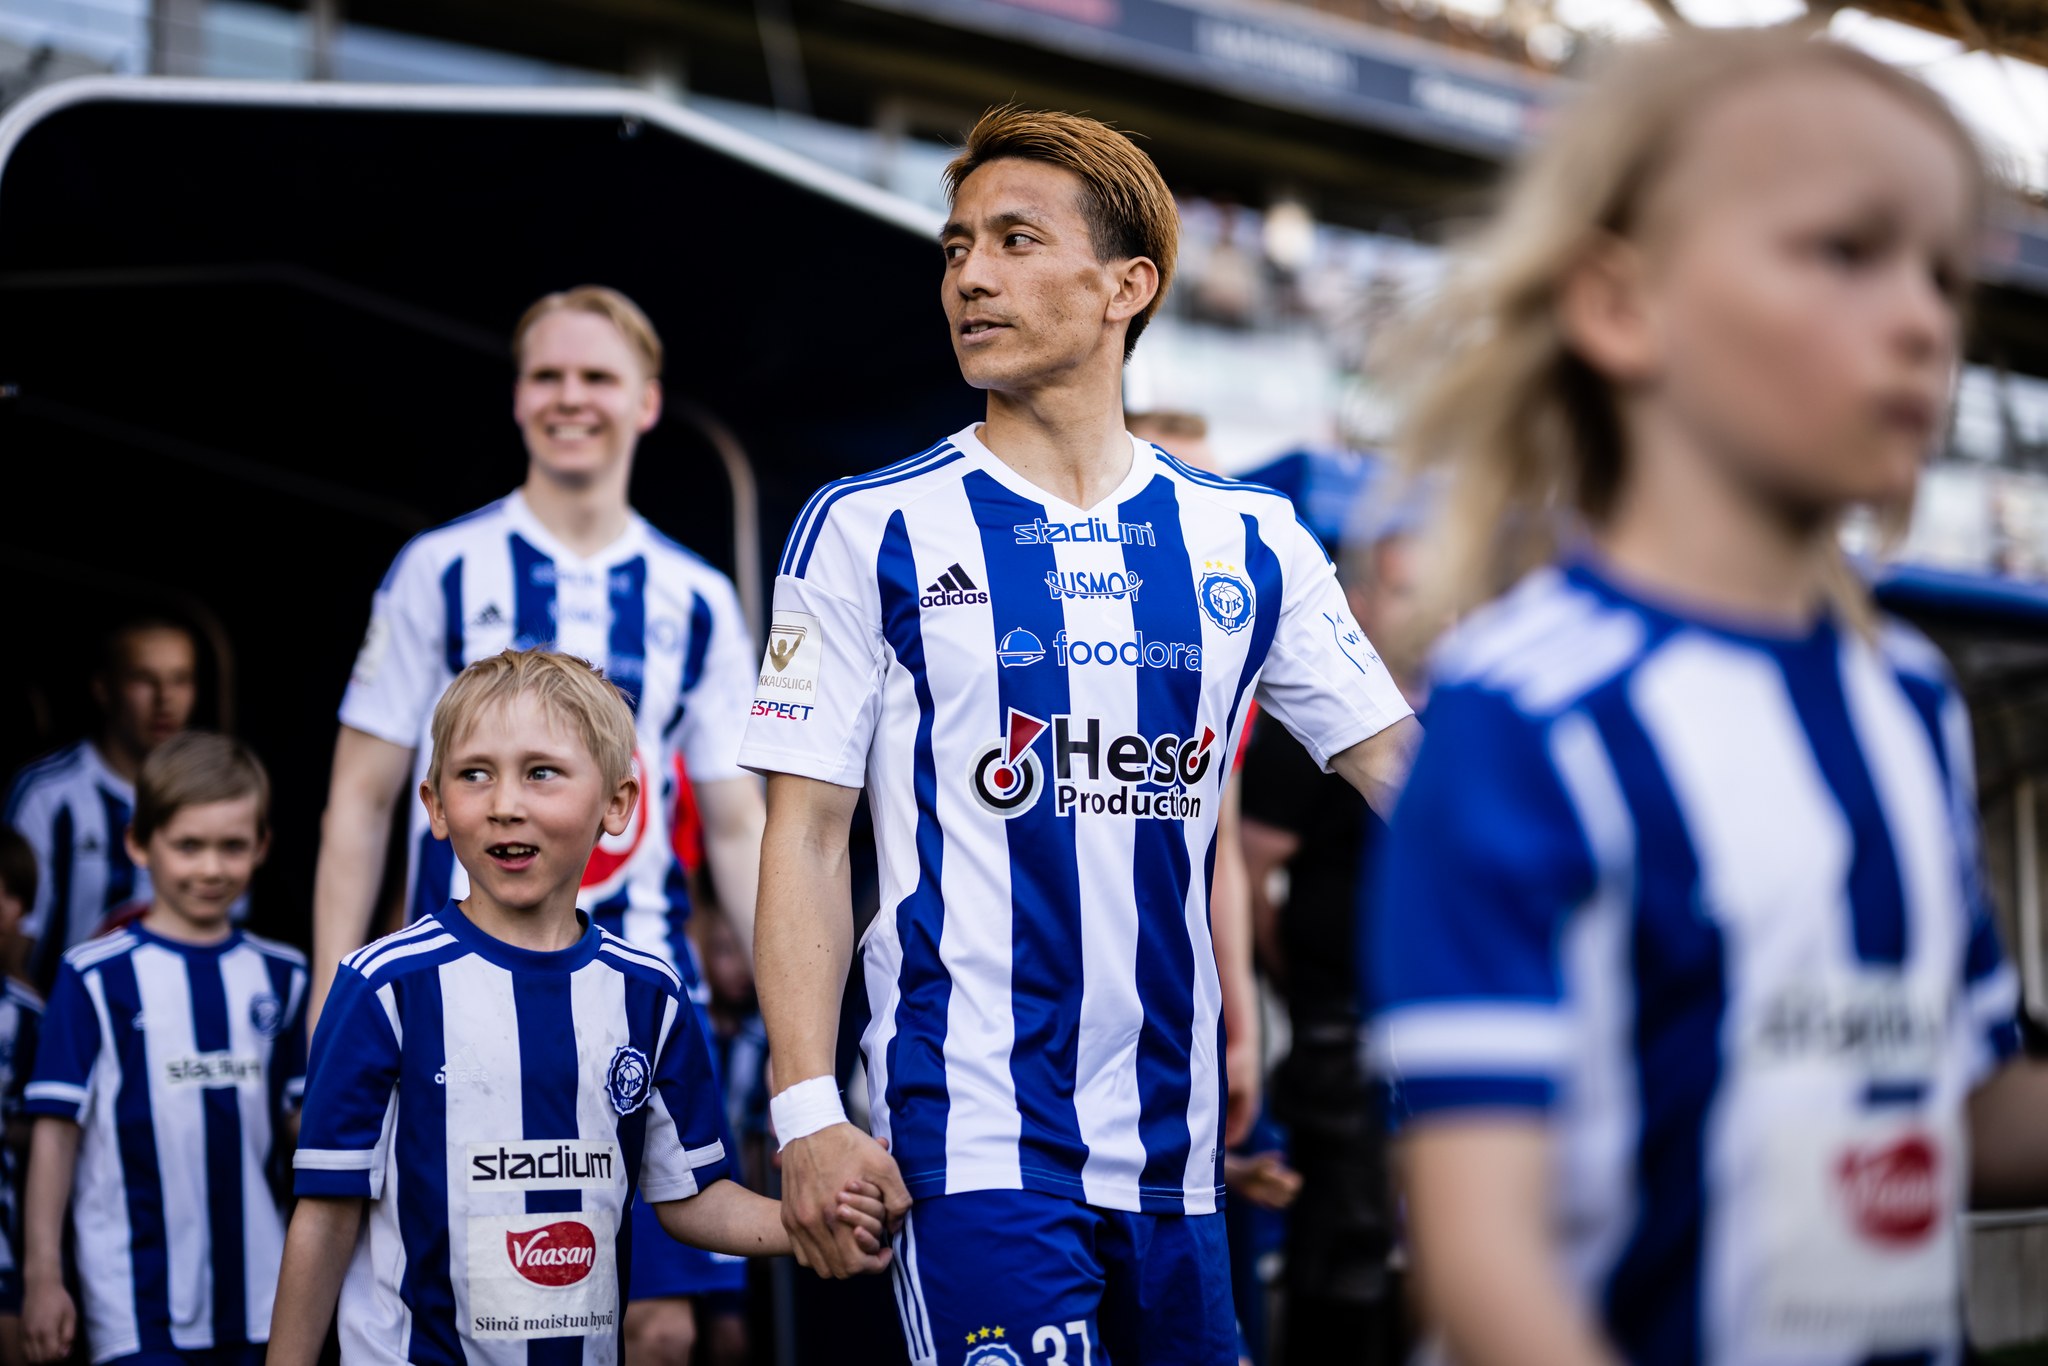 Evli and HJK team up to support opportunities for young people to play football